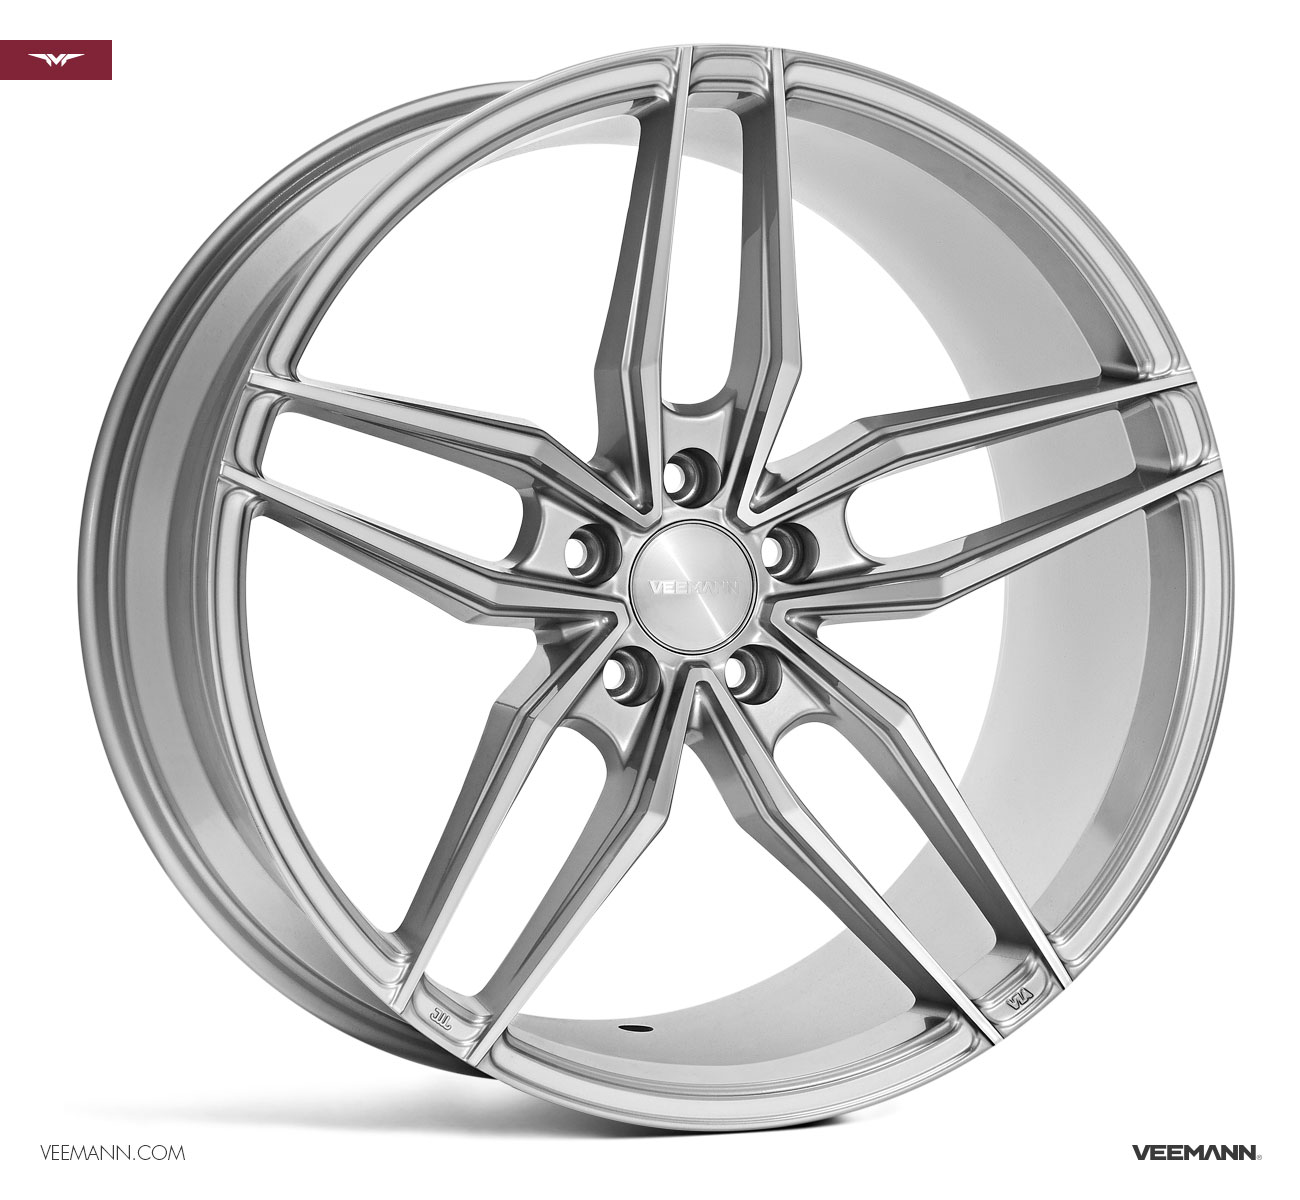 NEW 19" VEEMANN V-FS37 ALLOY WHEELS IN SILVER POL WITH WIDER 9.5" REARS